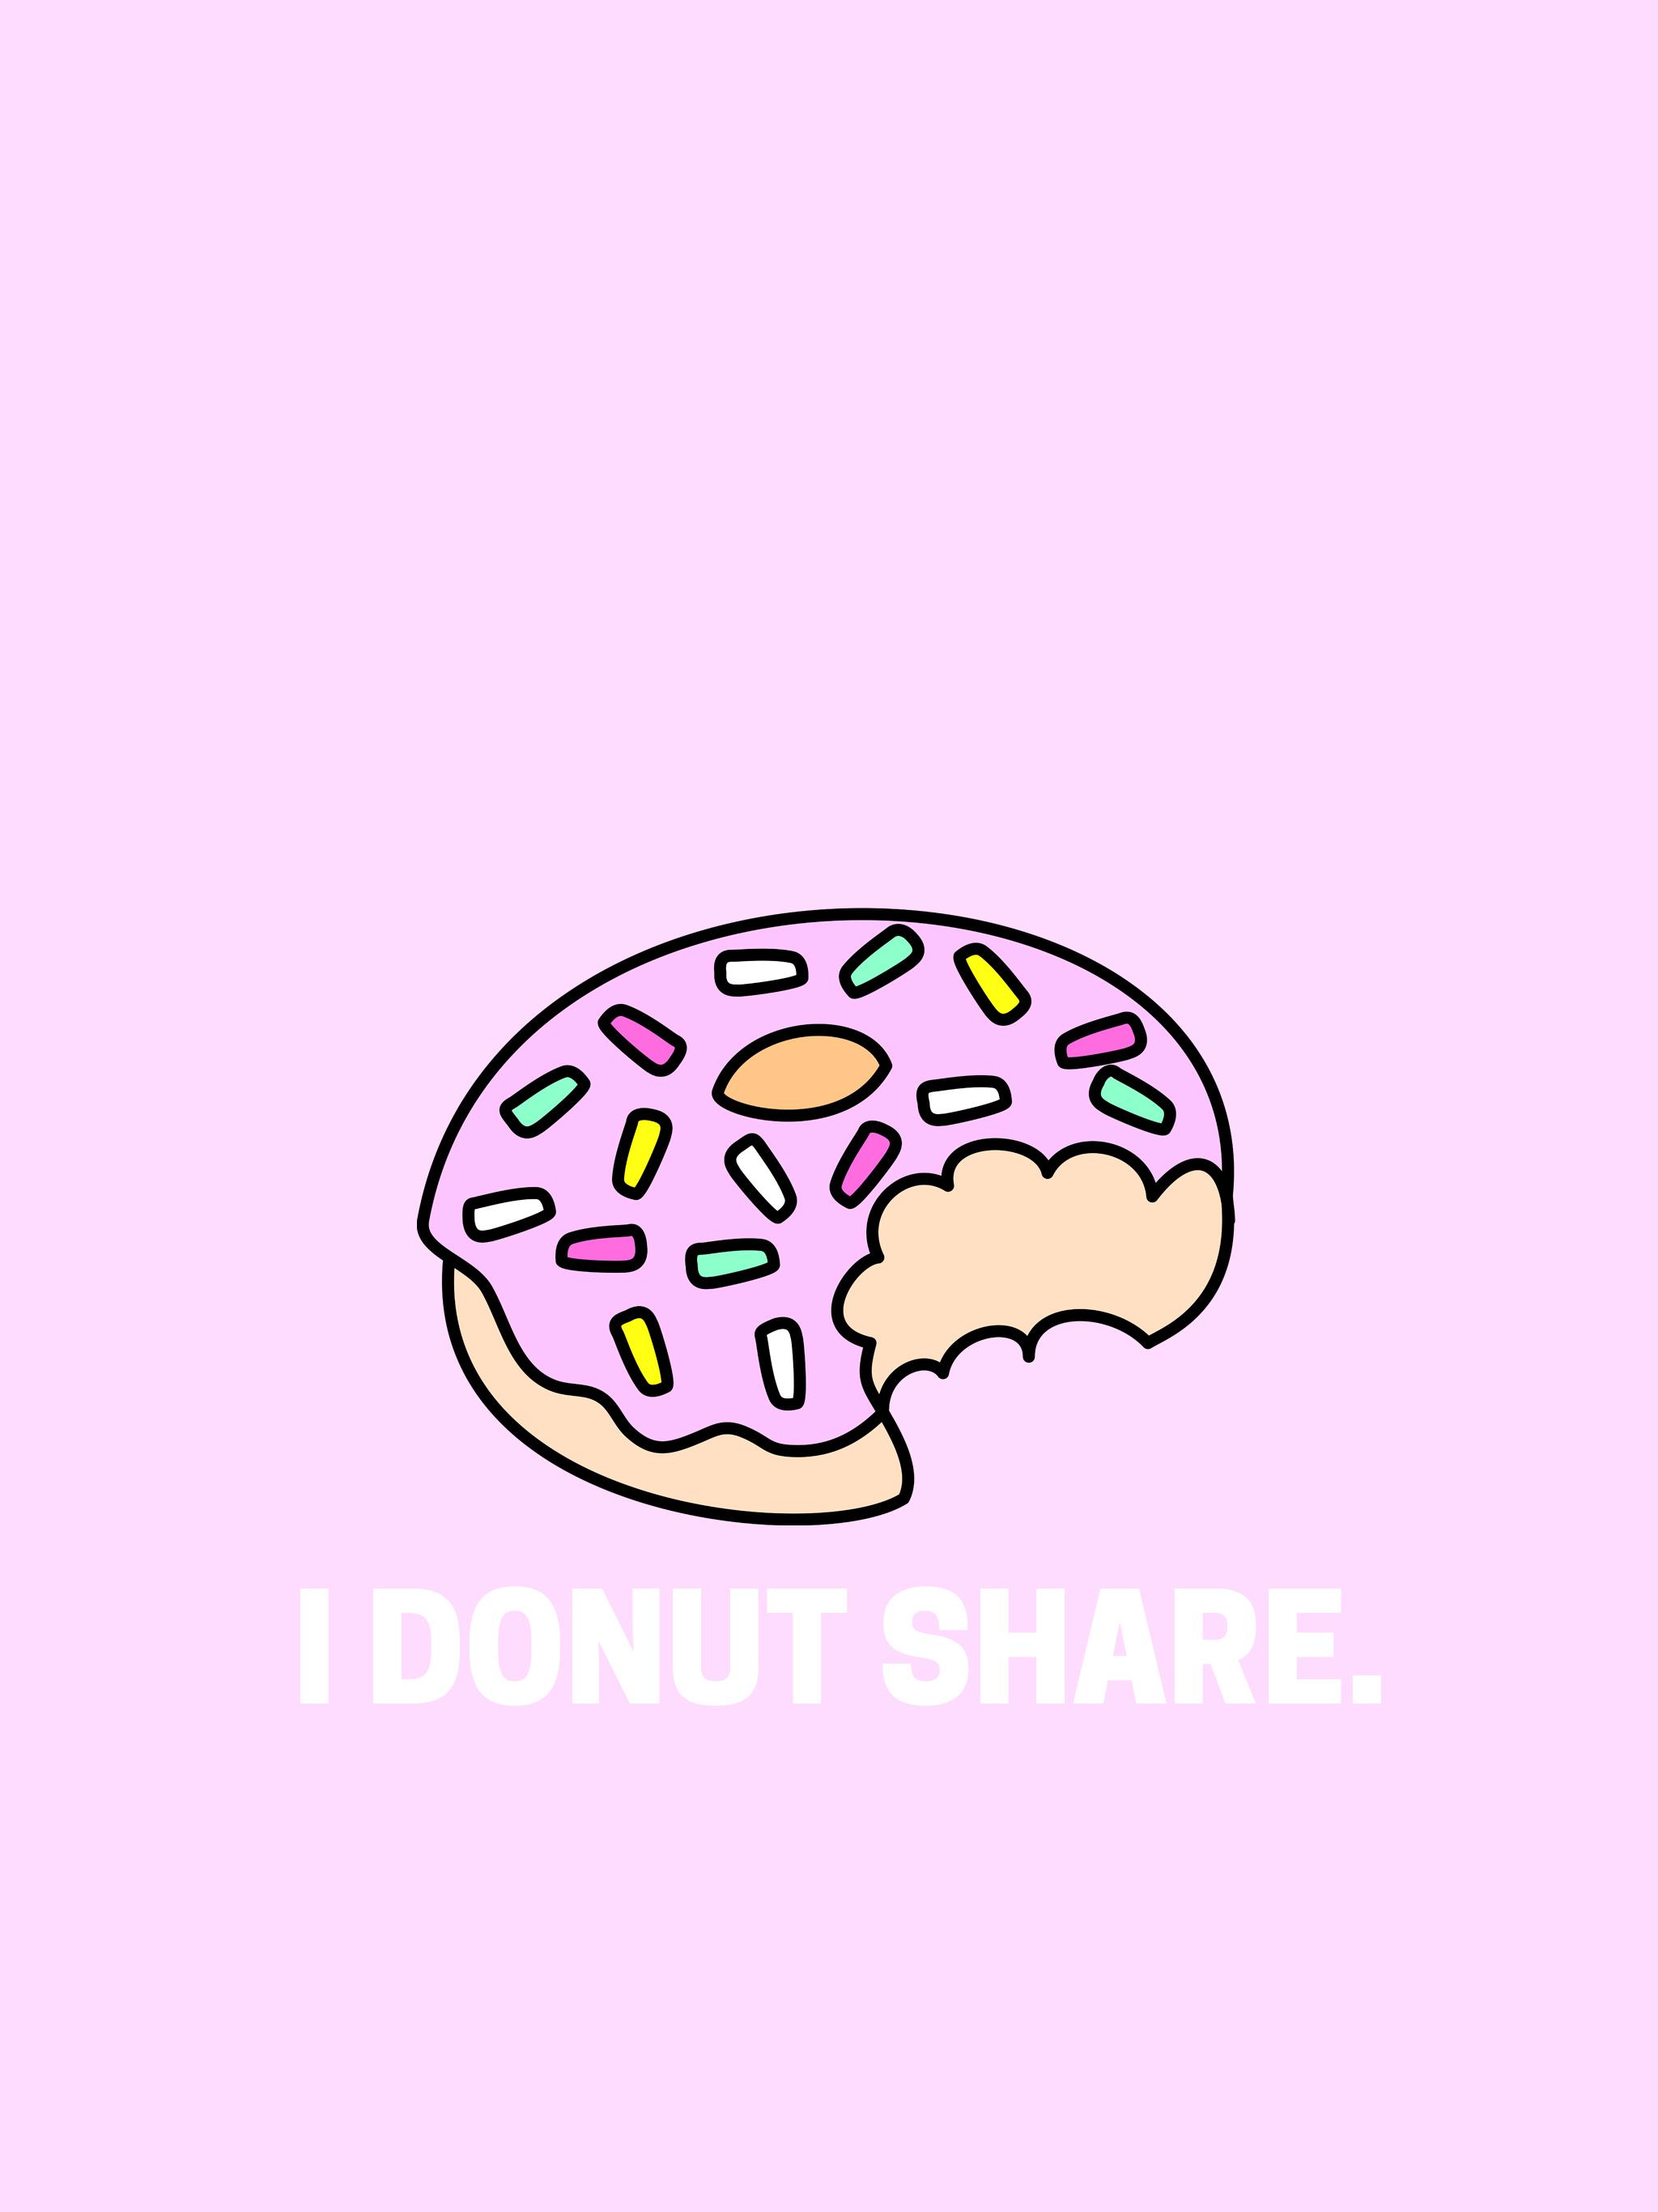 3D Donuts iPhone Wallpaper HD - iPhone Wallpapers